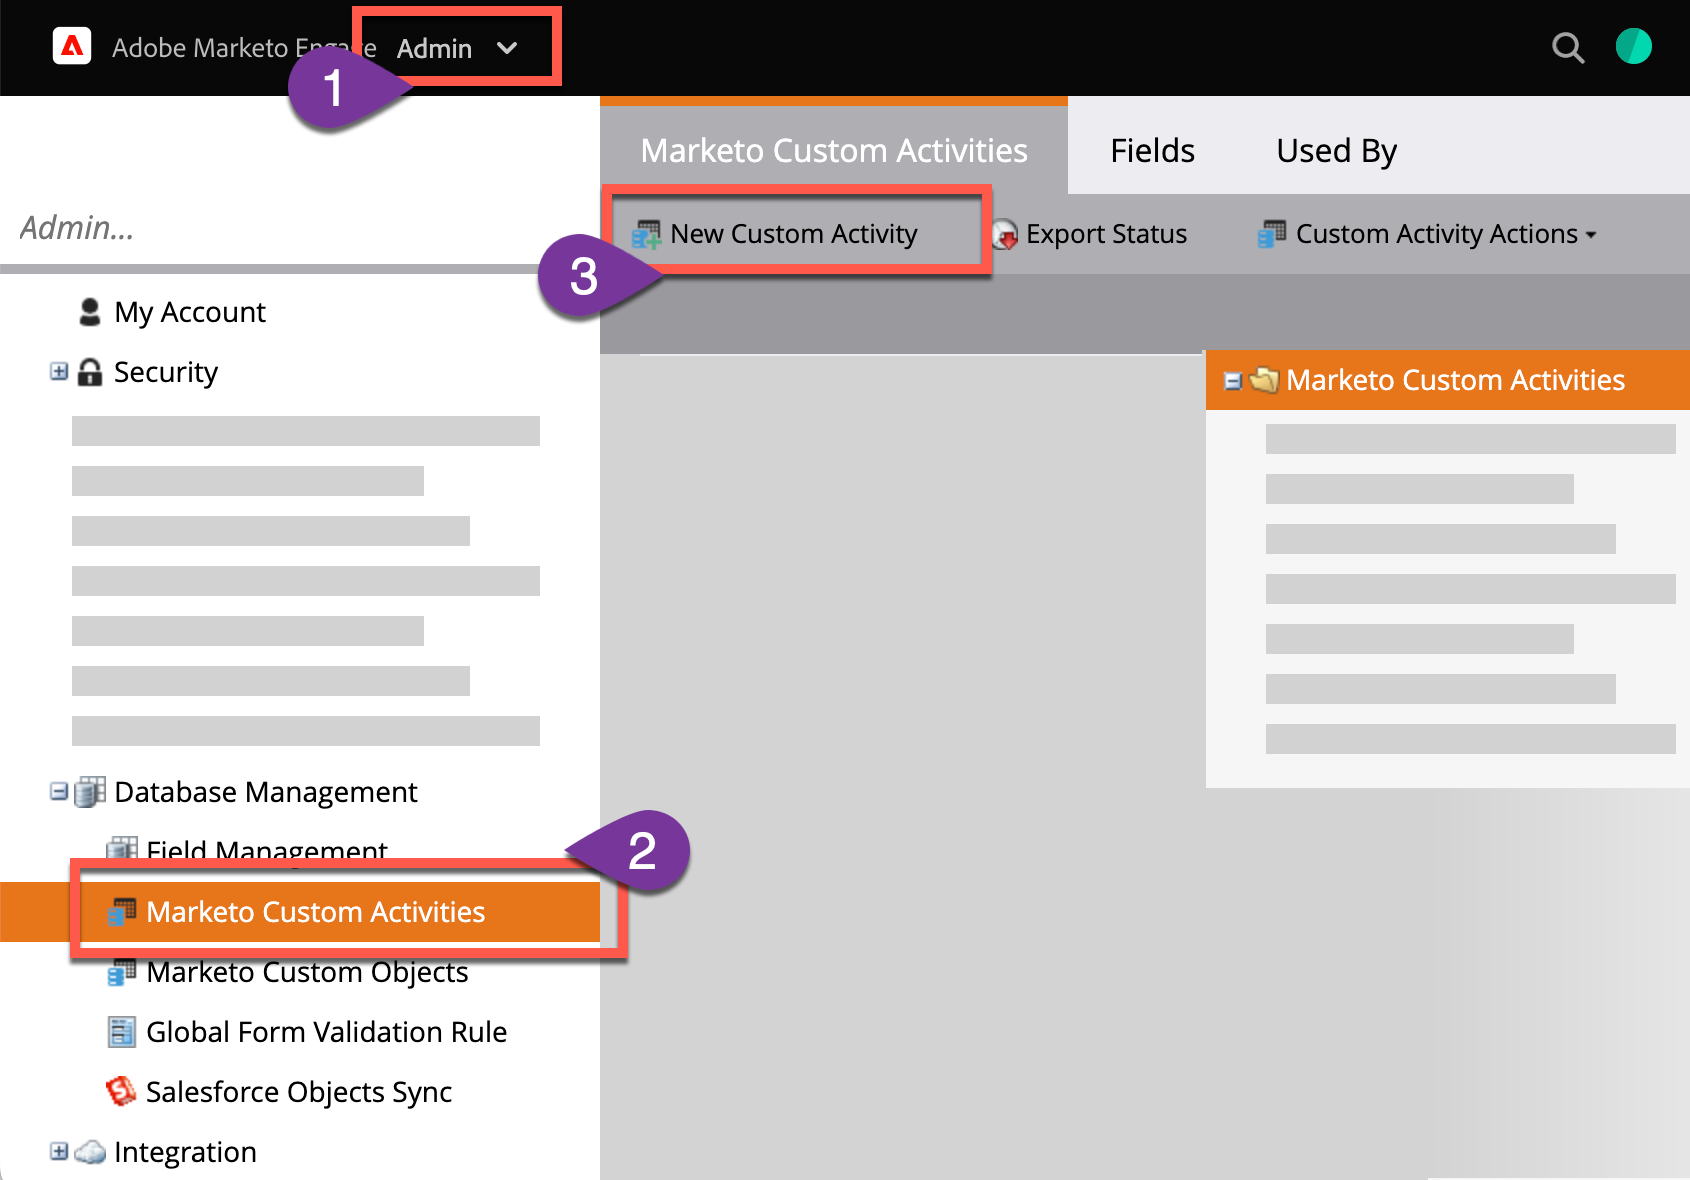 As an Marketo Admin, adding new Custom Activities for Vidyard to your workspace